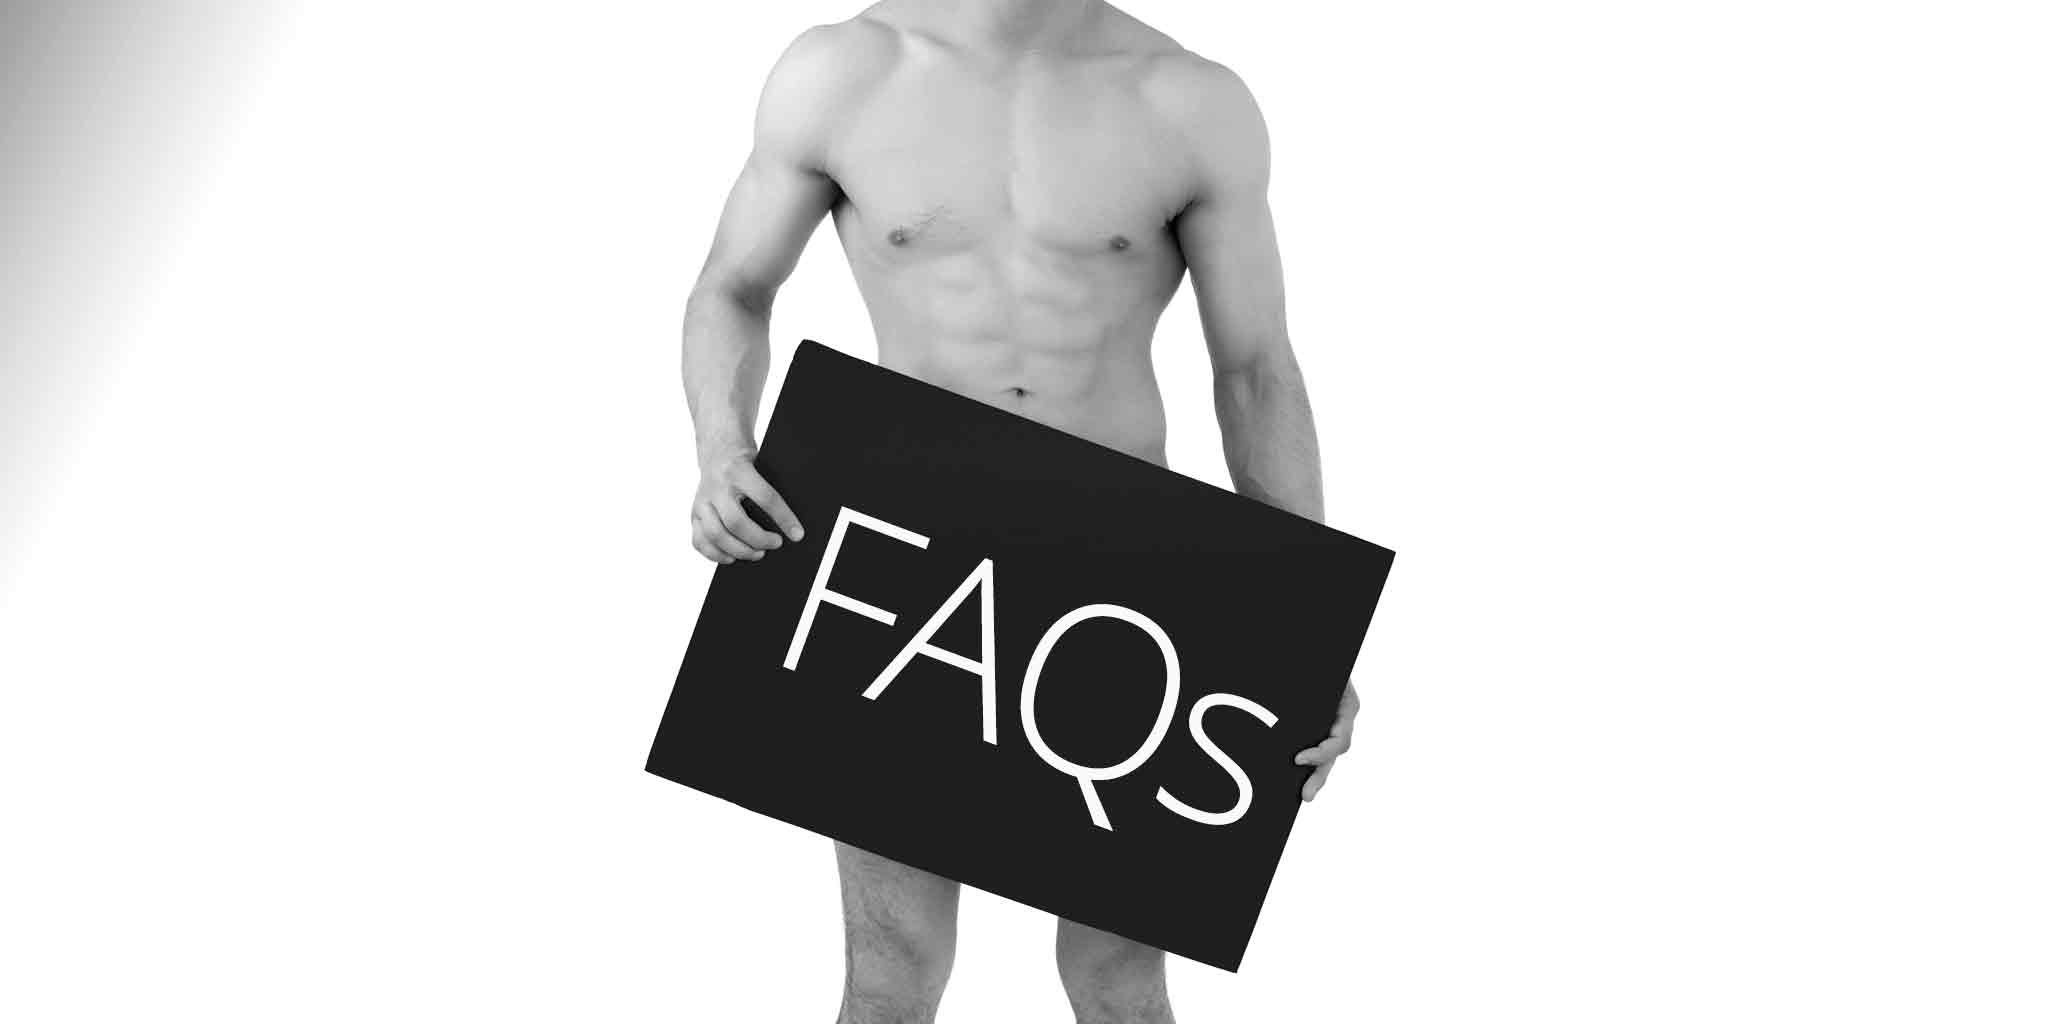 Black and white image of a shirtless man with a toned body, holding a large sign in front of him that reads 'FAQs' in bold letters. The sign covers his lower body, symbolizing the frequently asked questions regarding men's Brazilian waxing services.